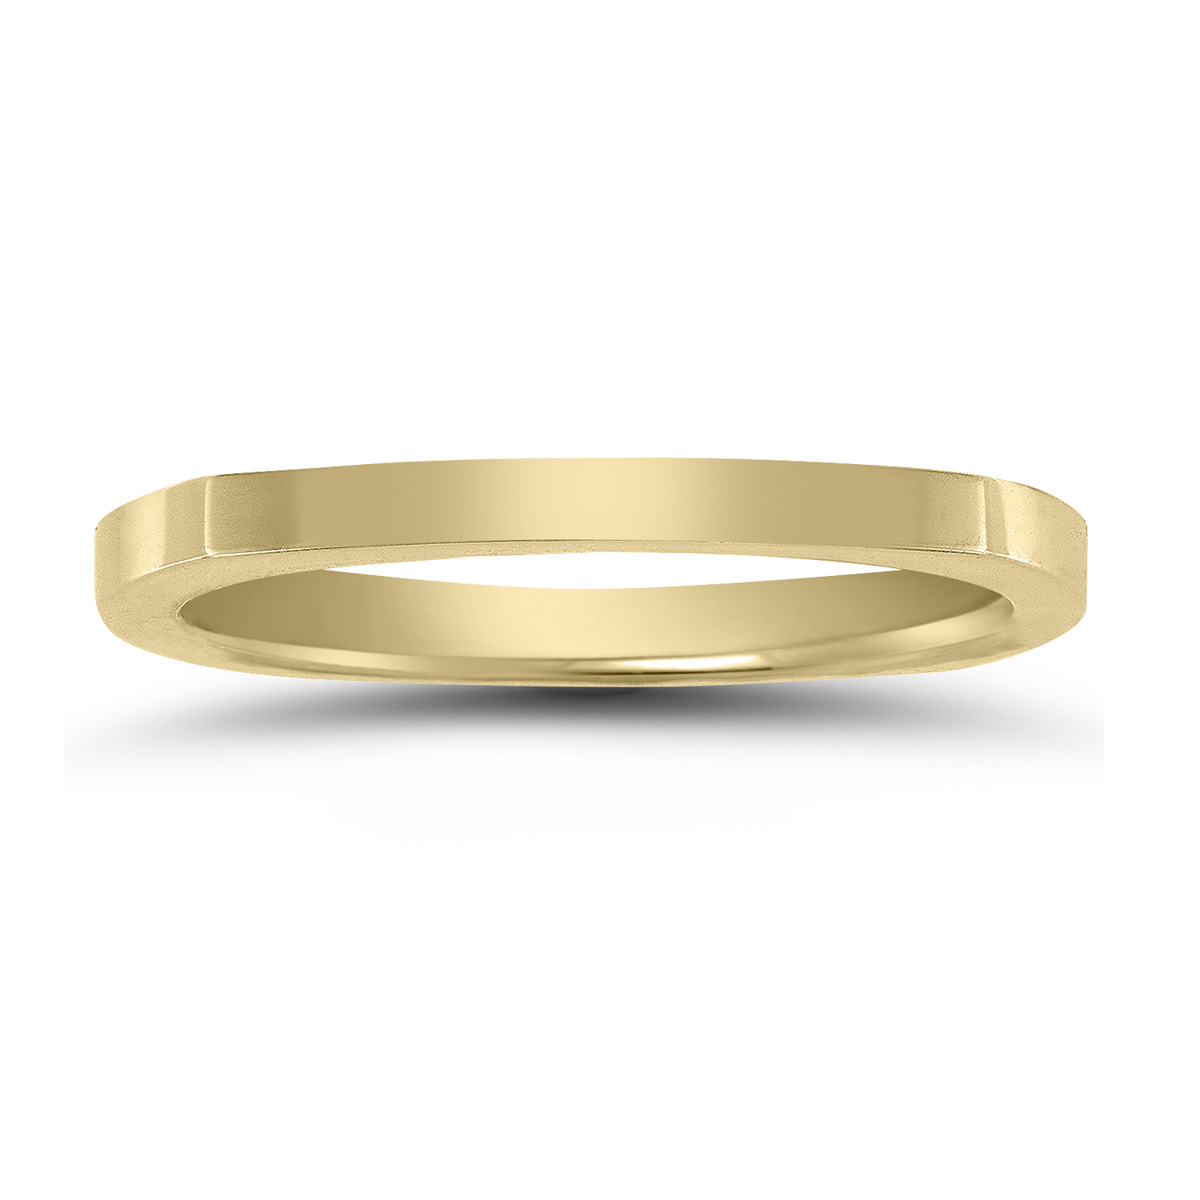 4 Sided Thin 1.5MM Wedding Band in 14K Yellow Gold